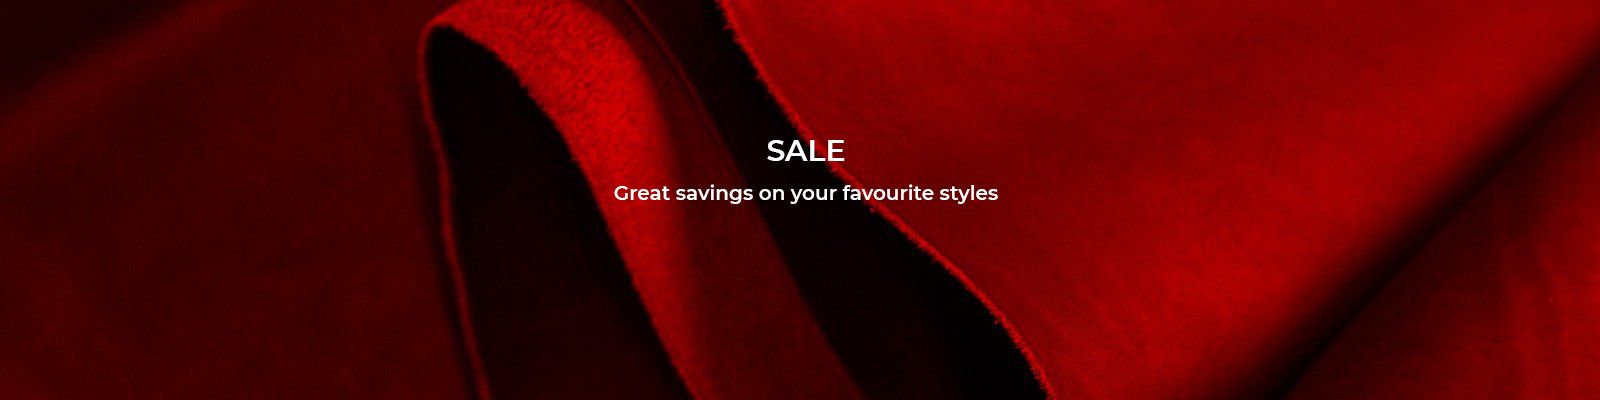 Final chance to grab cos uk sale items at unbelievable prices